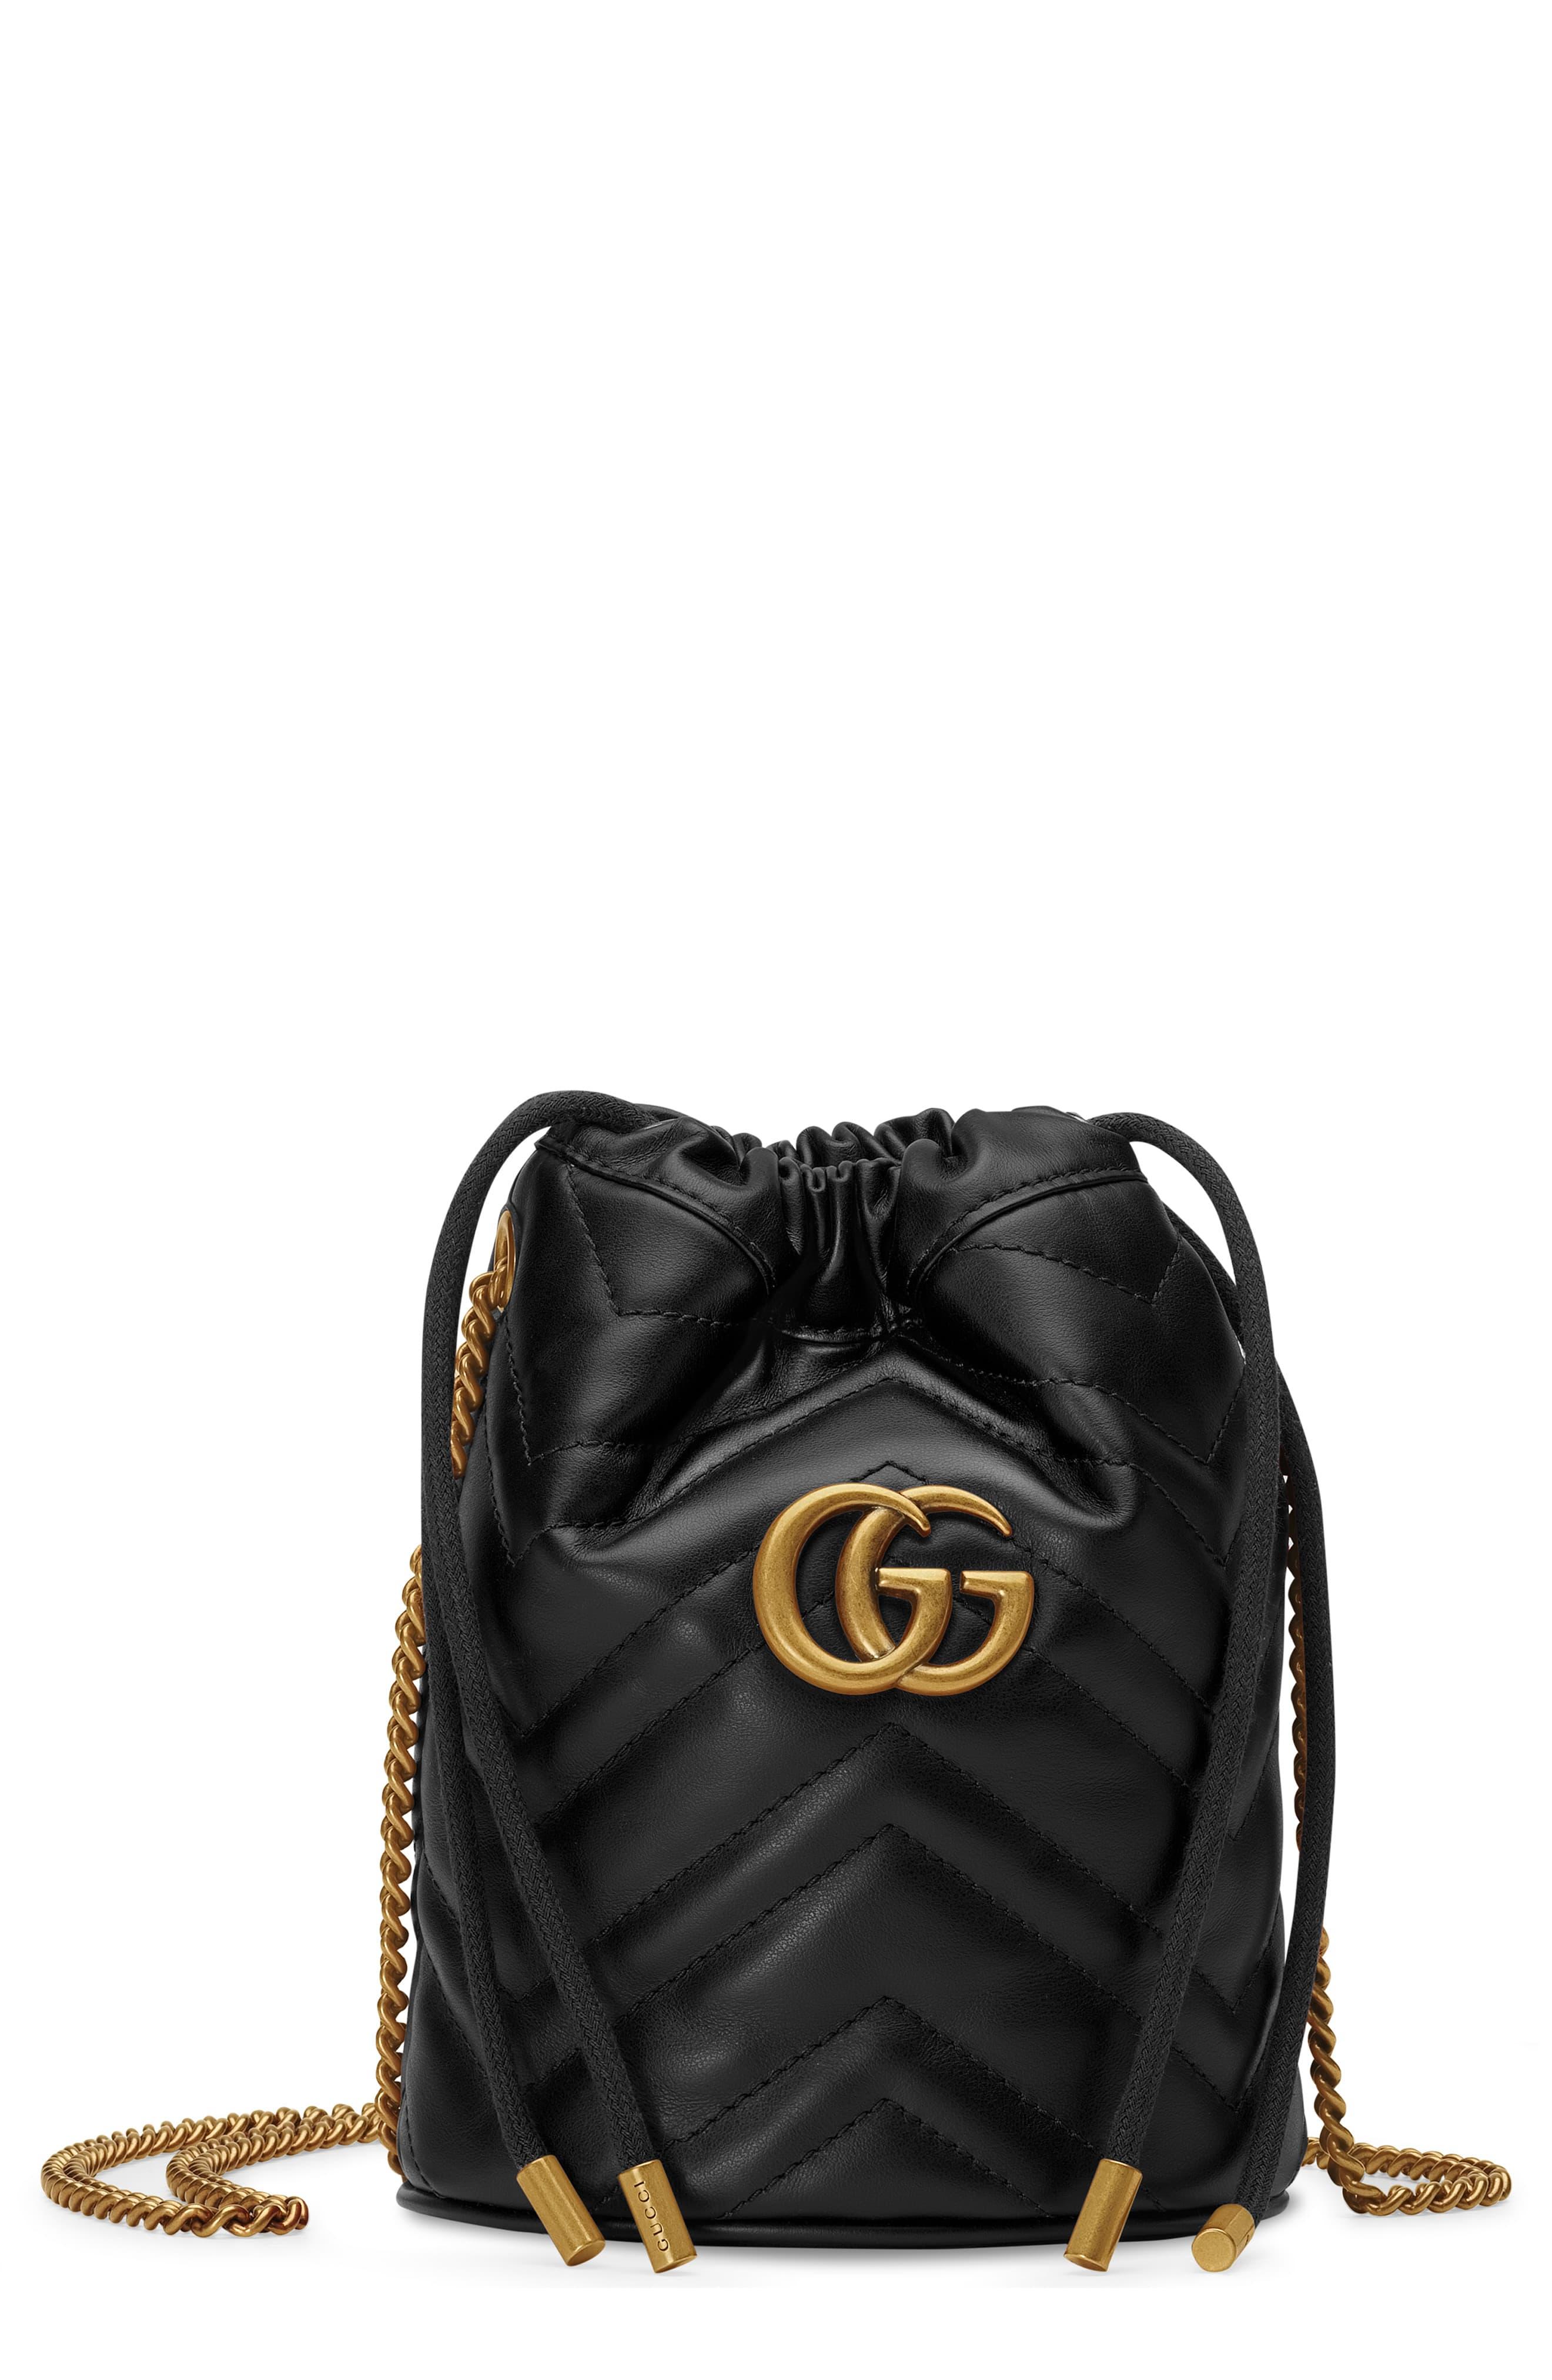 Gucci Mini Gg Marmont 2.0 Quilted Leather Bucket Bag in Black - Lyst